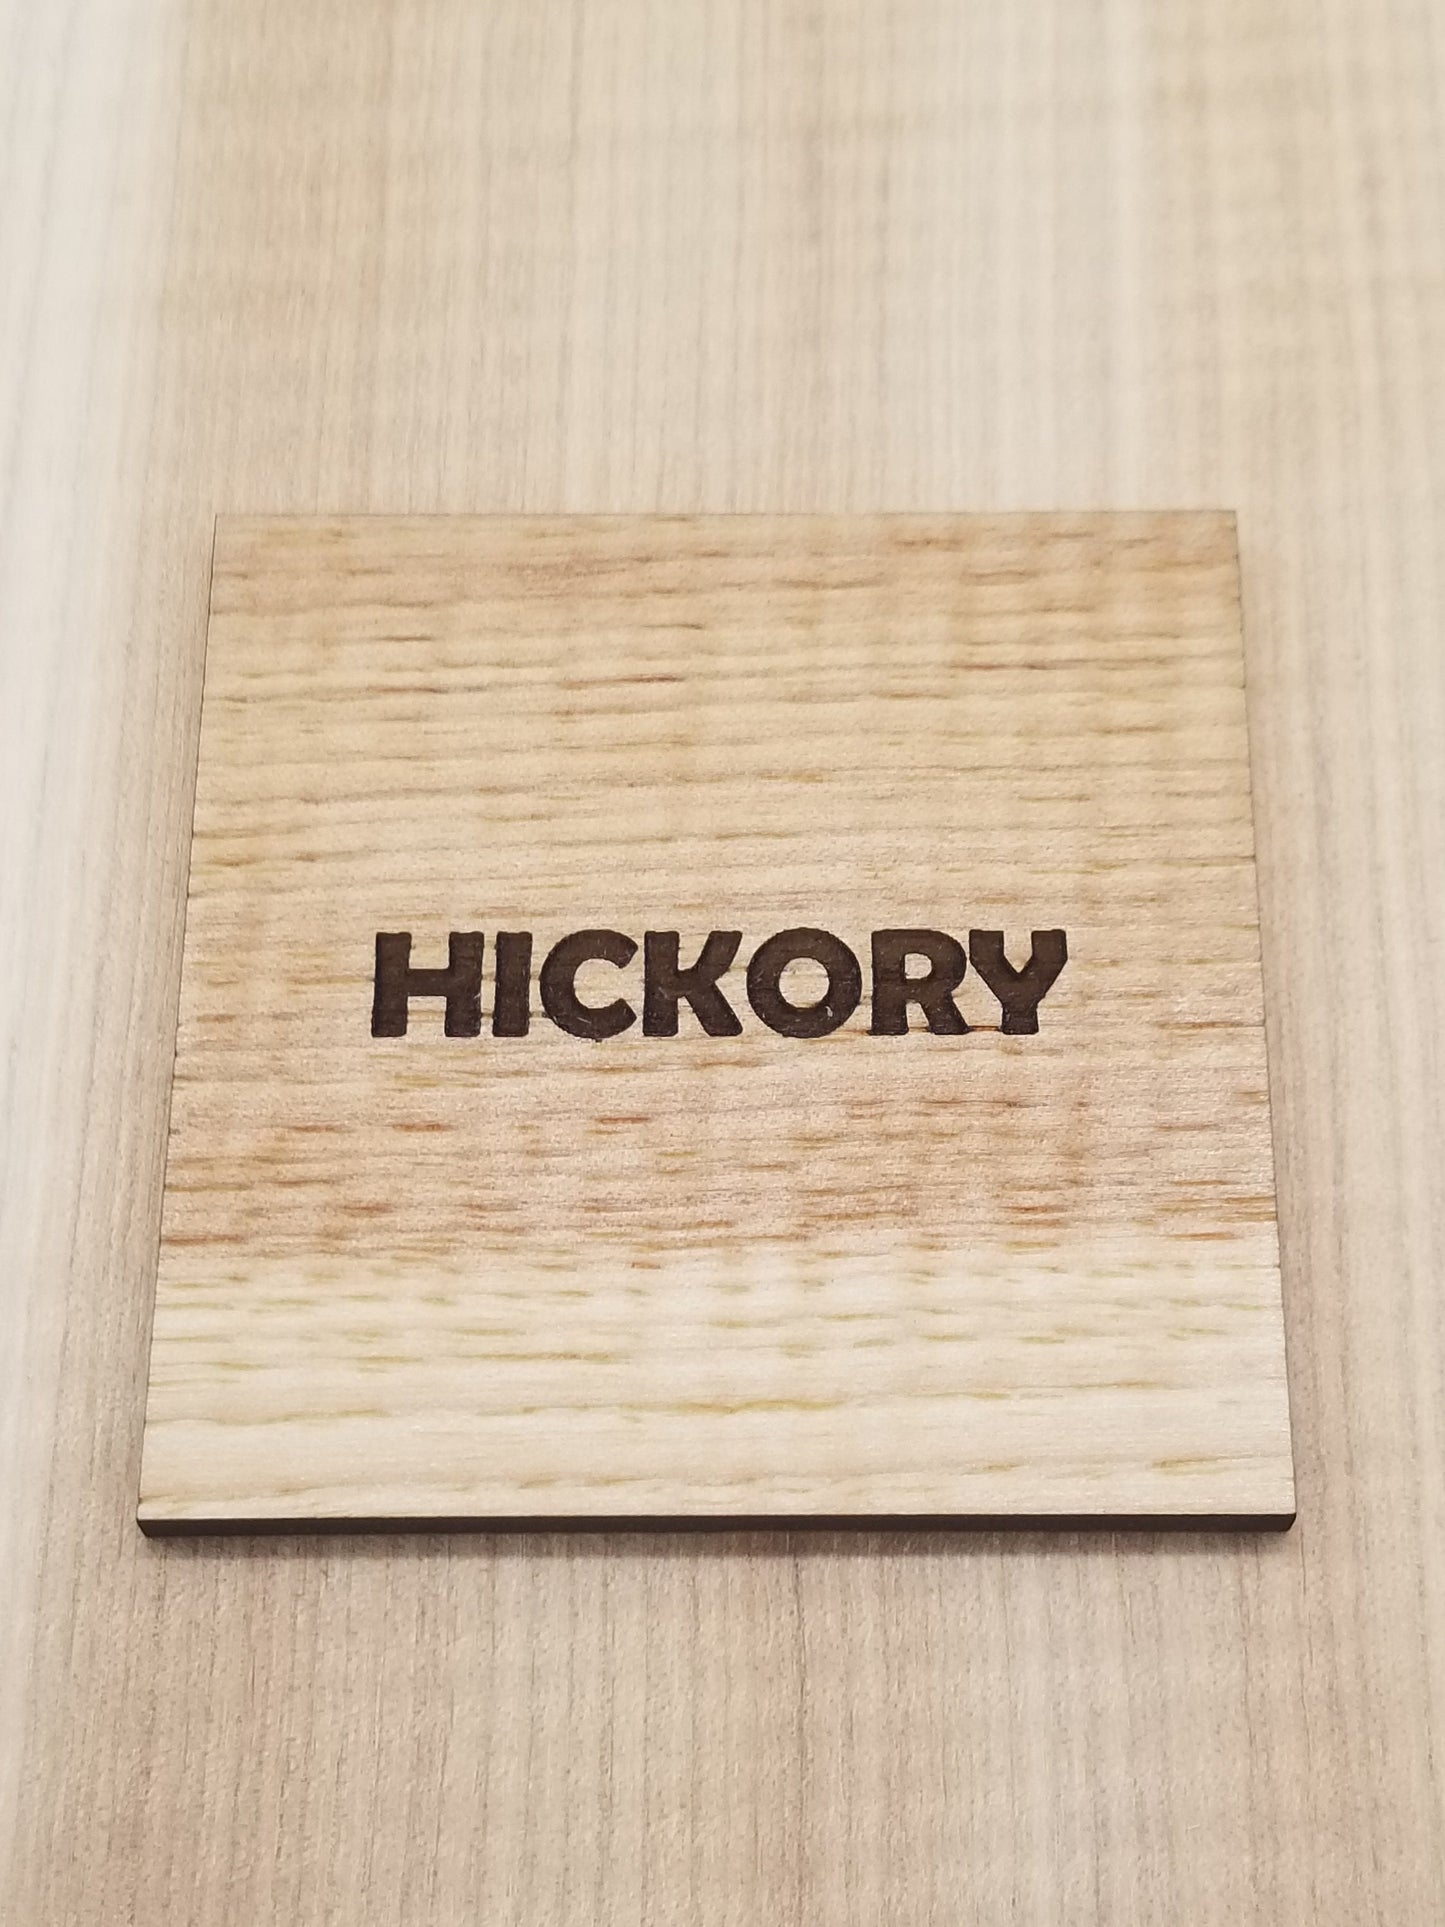 1/8 Hickory Plywood / Hickory for laser cutters